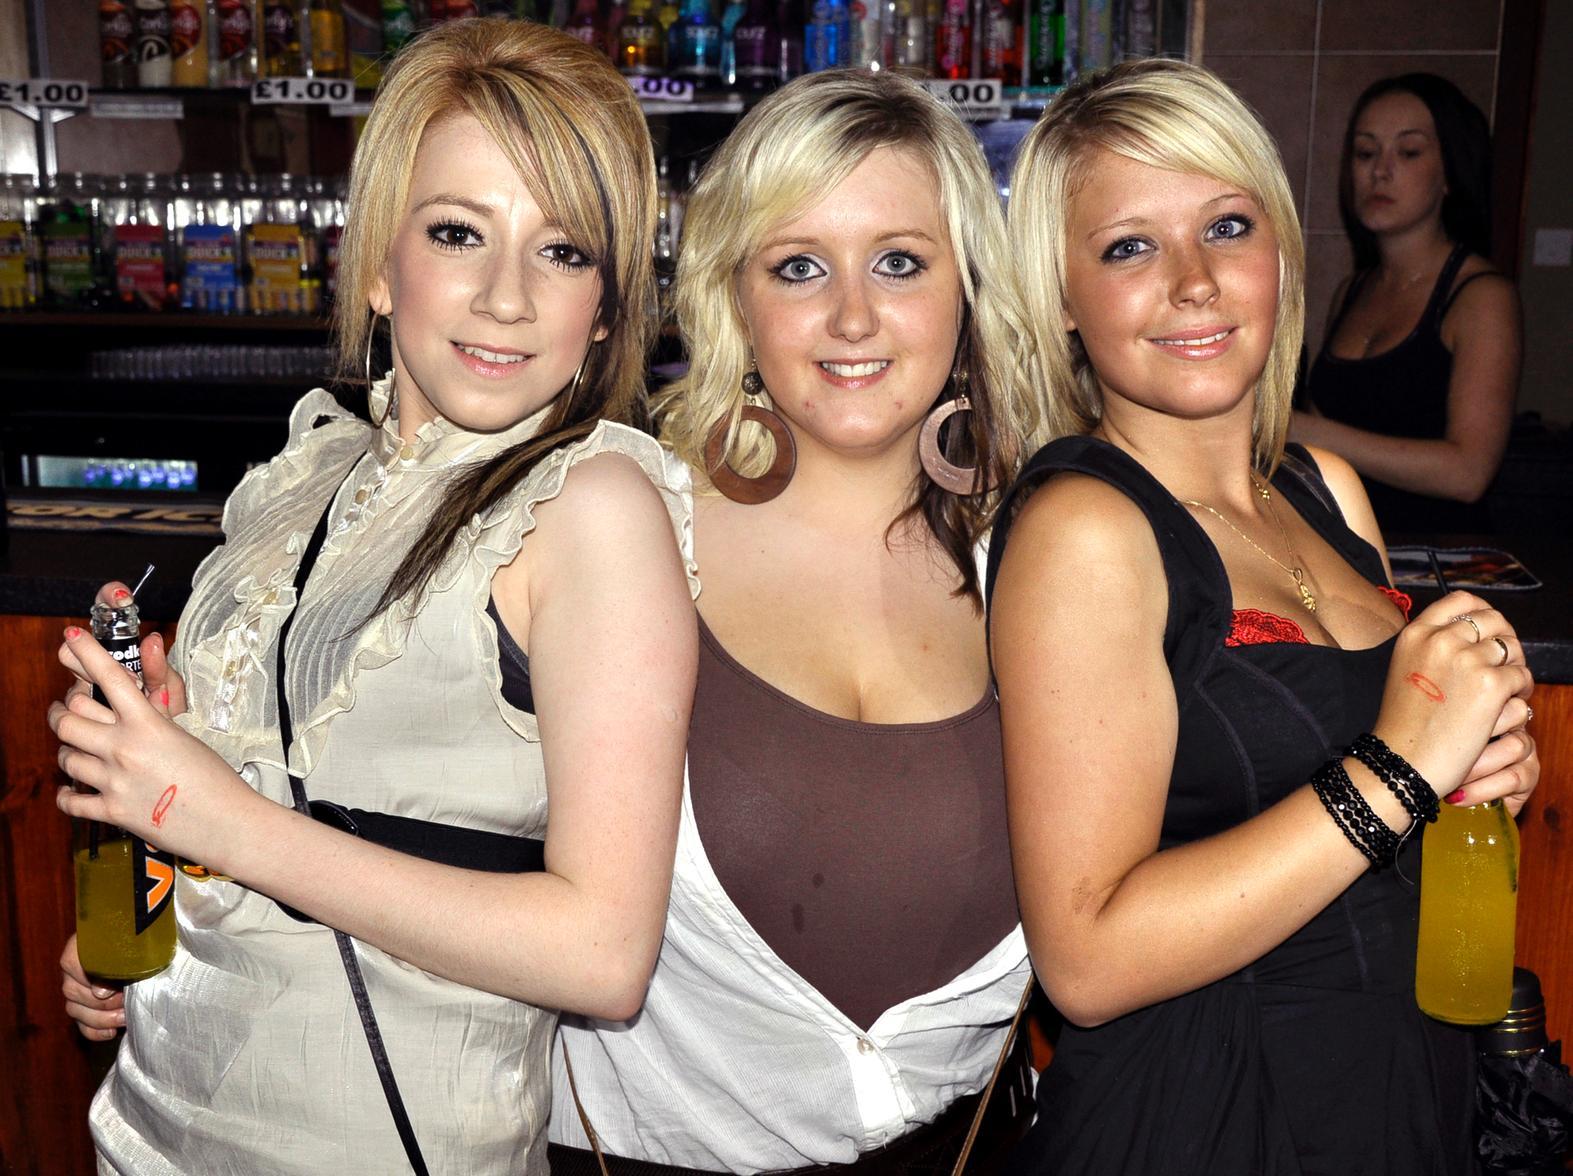 Jade, Louise and Steph having a great night in Quids Inn.